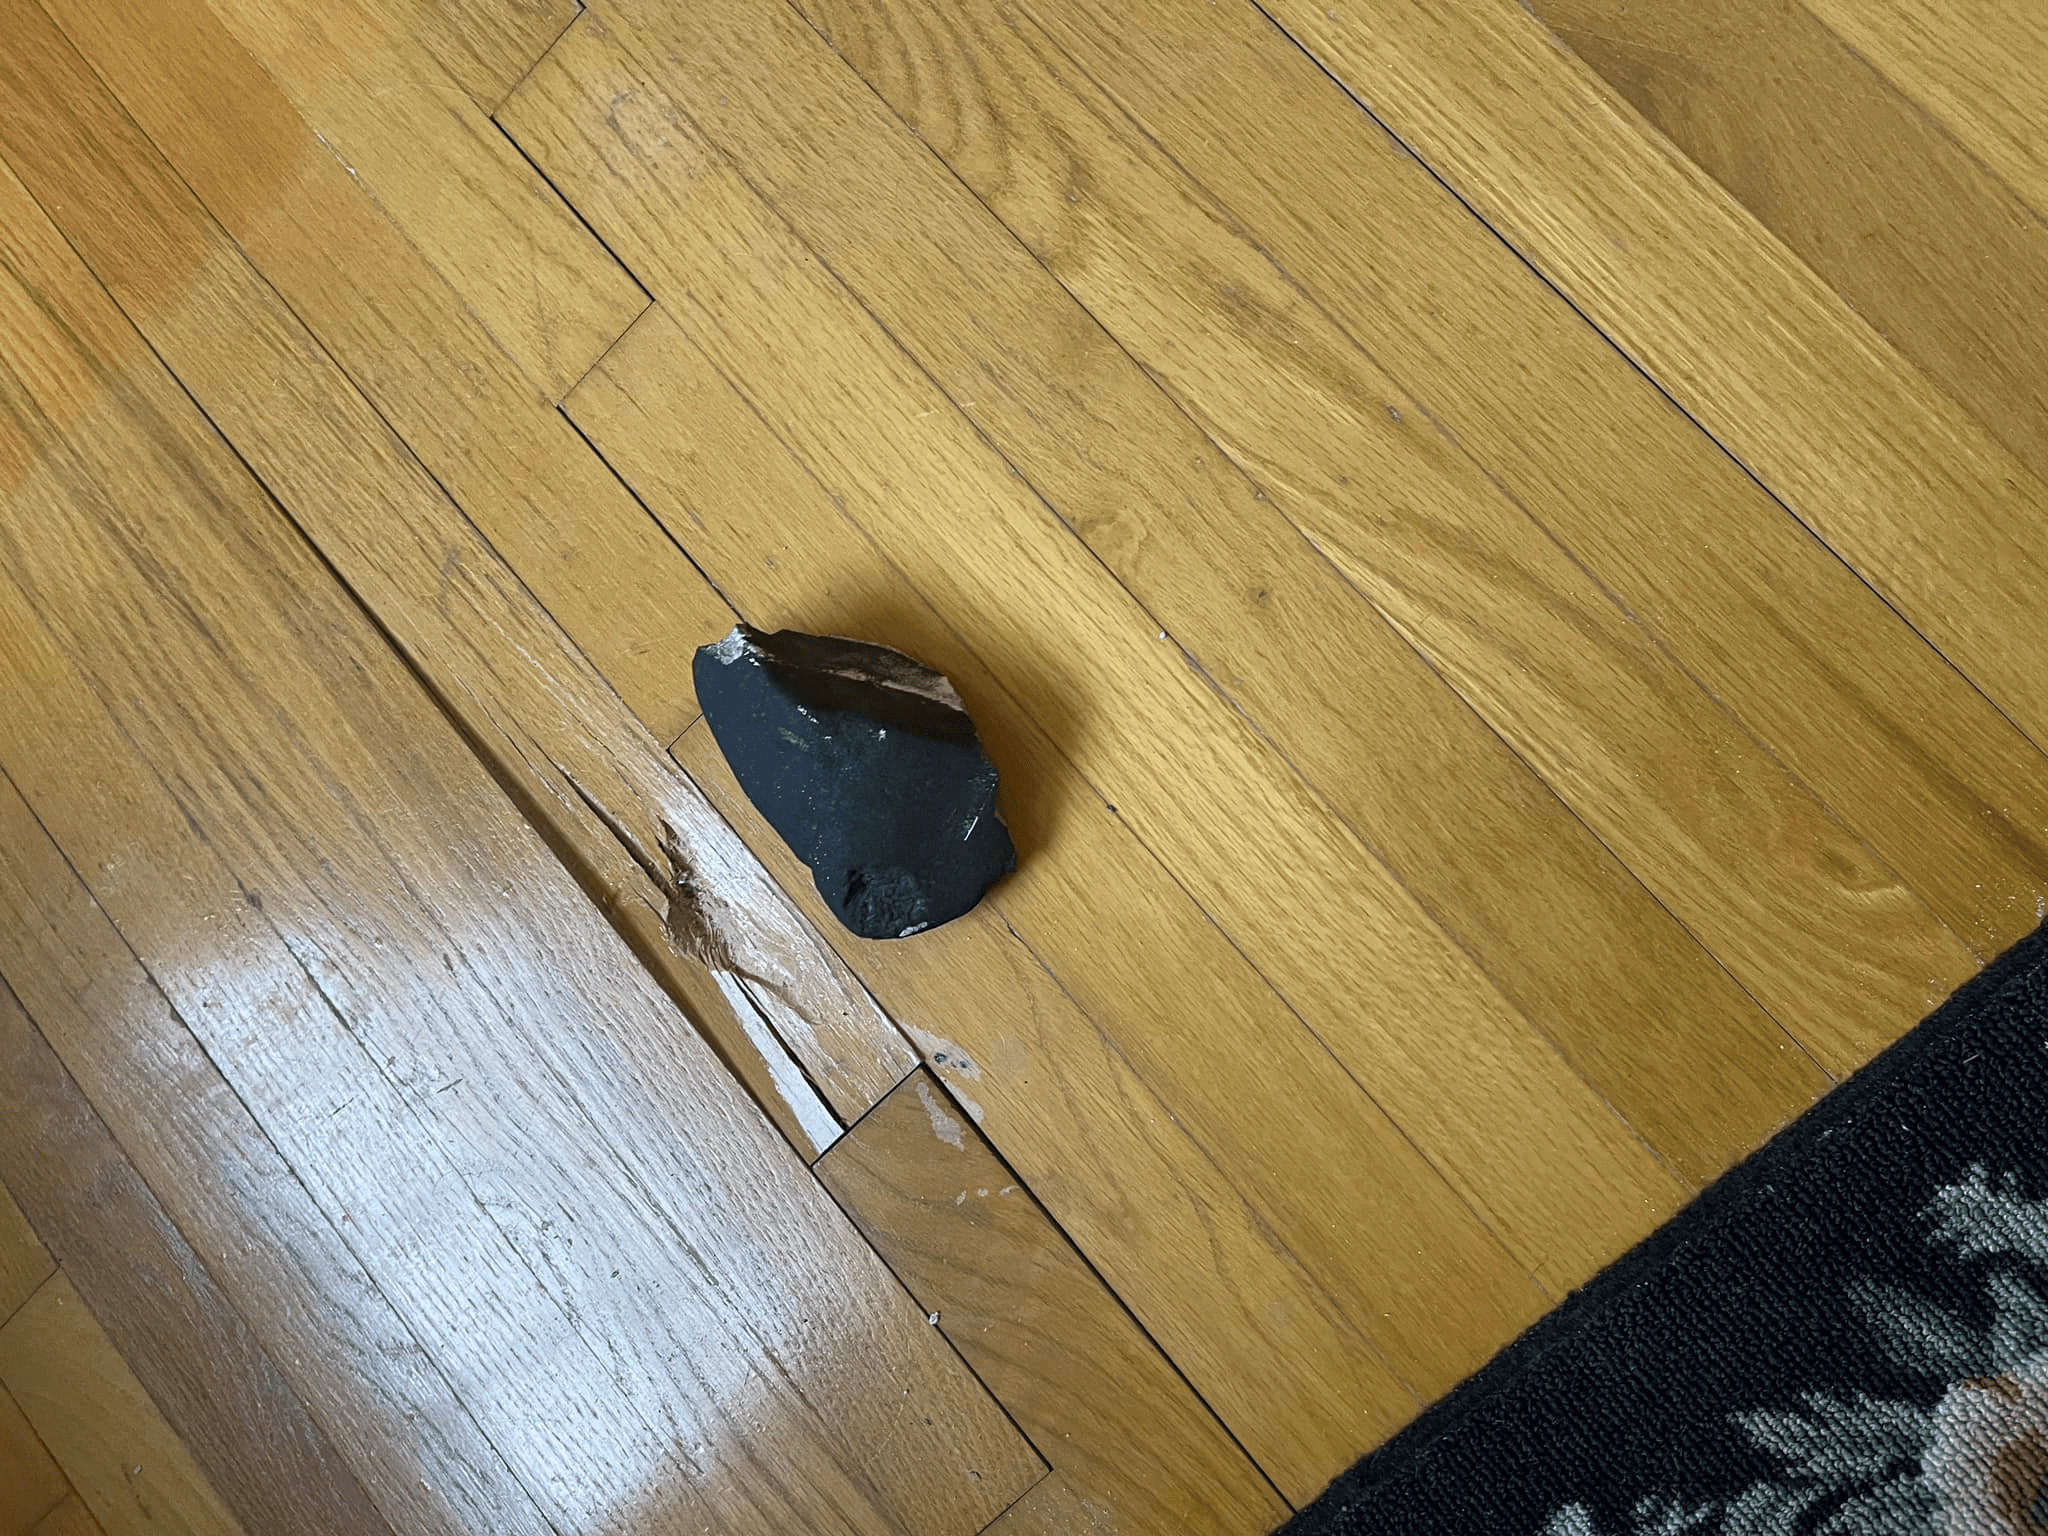 The Hopewell meteorite next to the piece of the floor it damaged